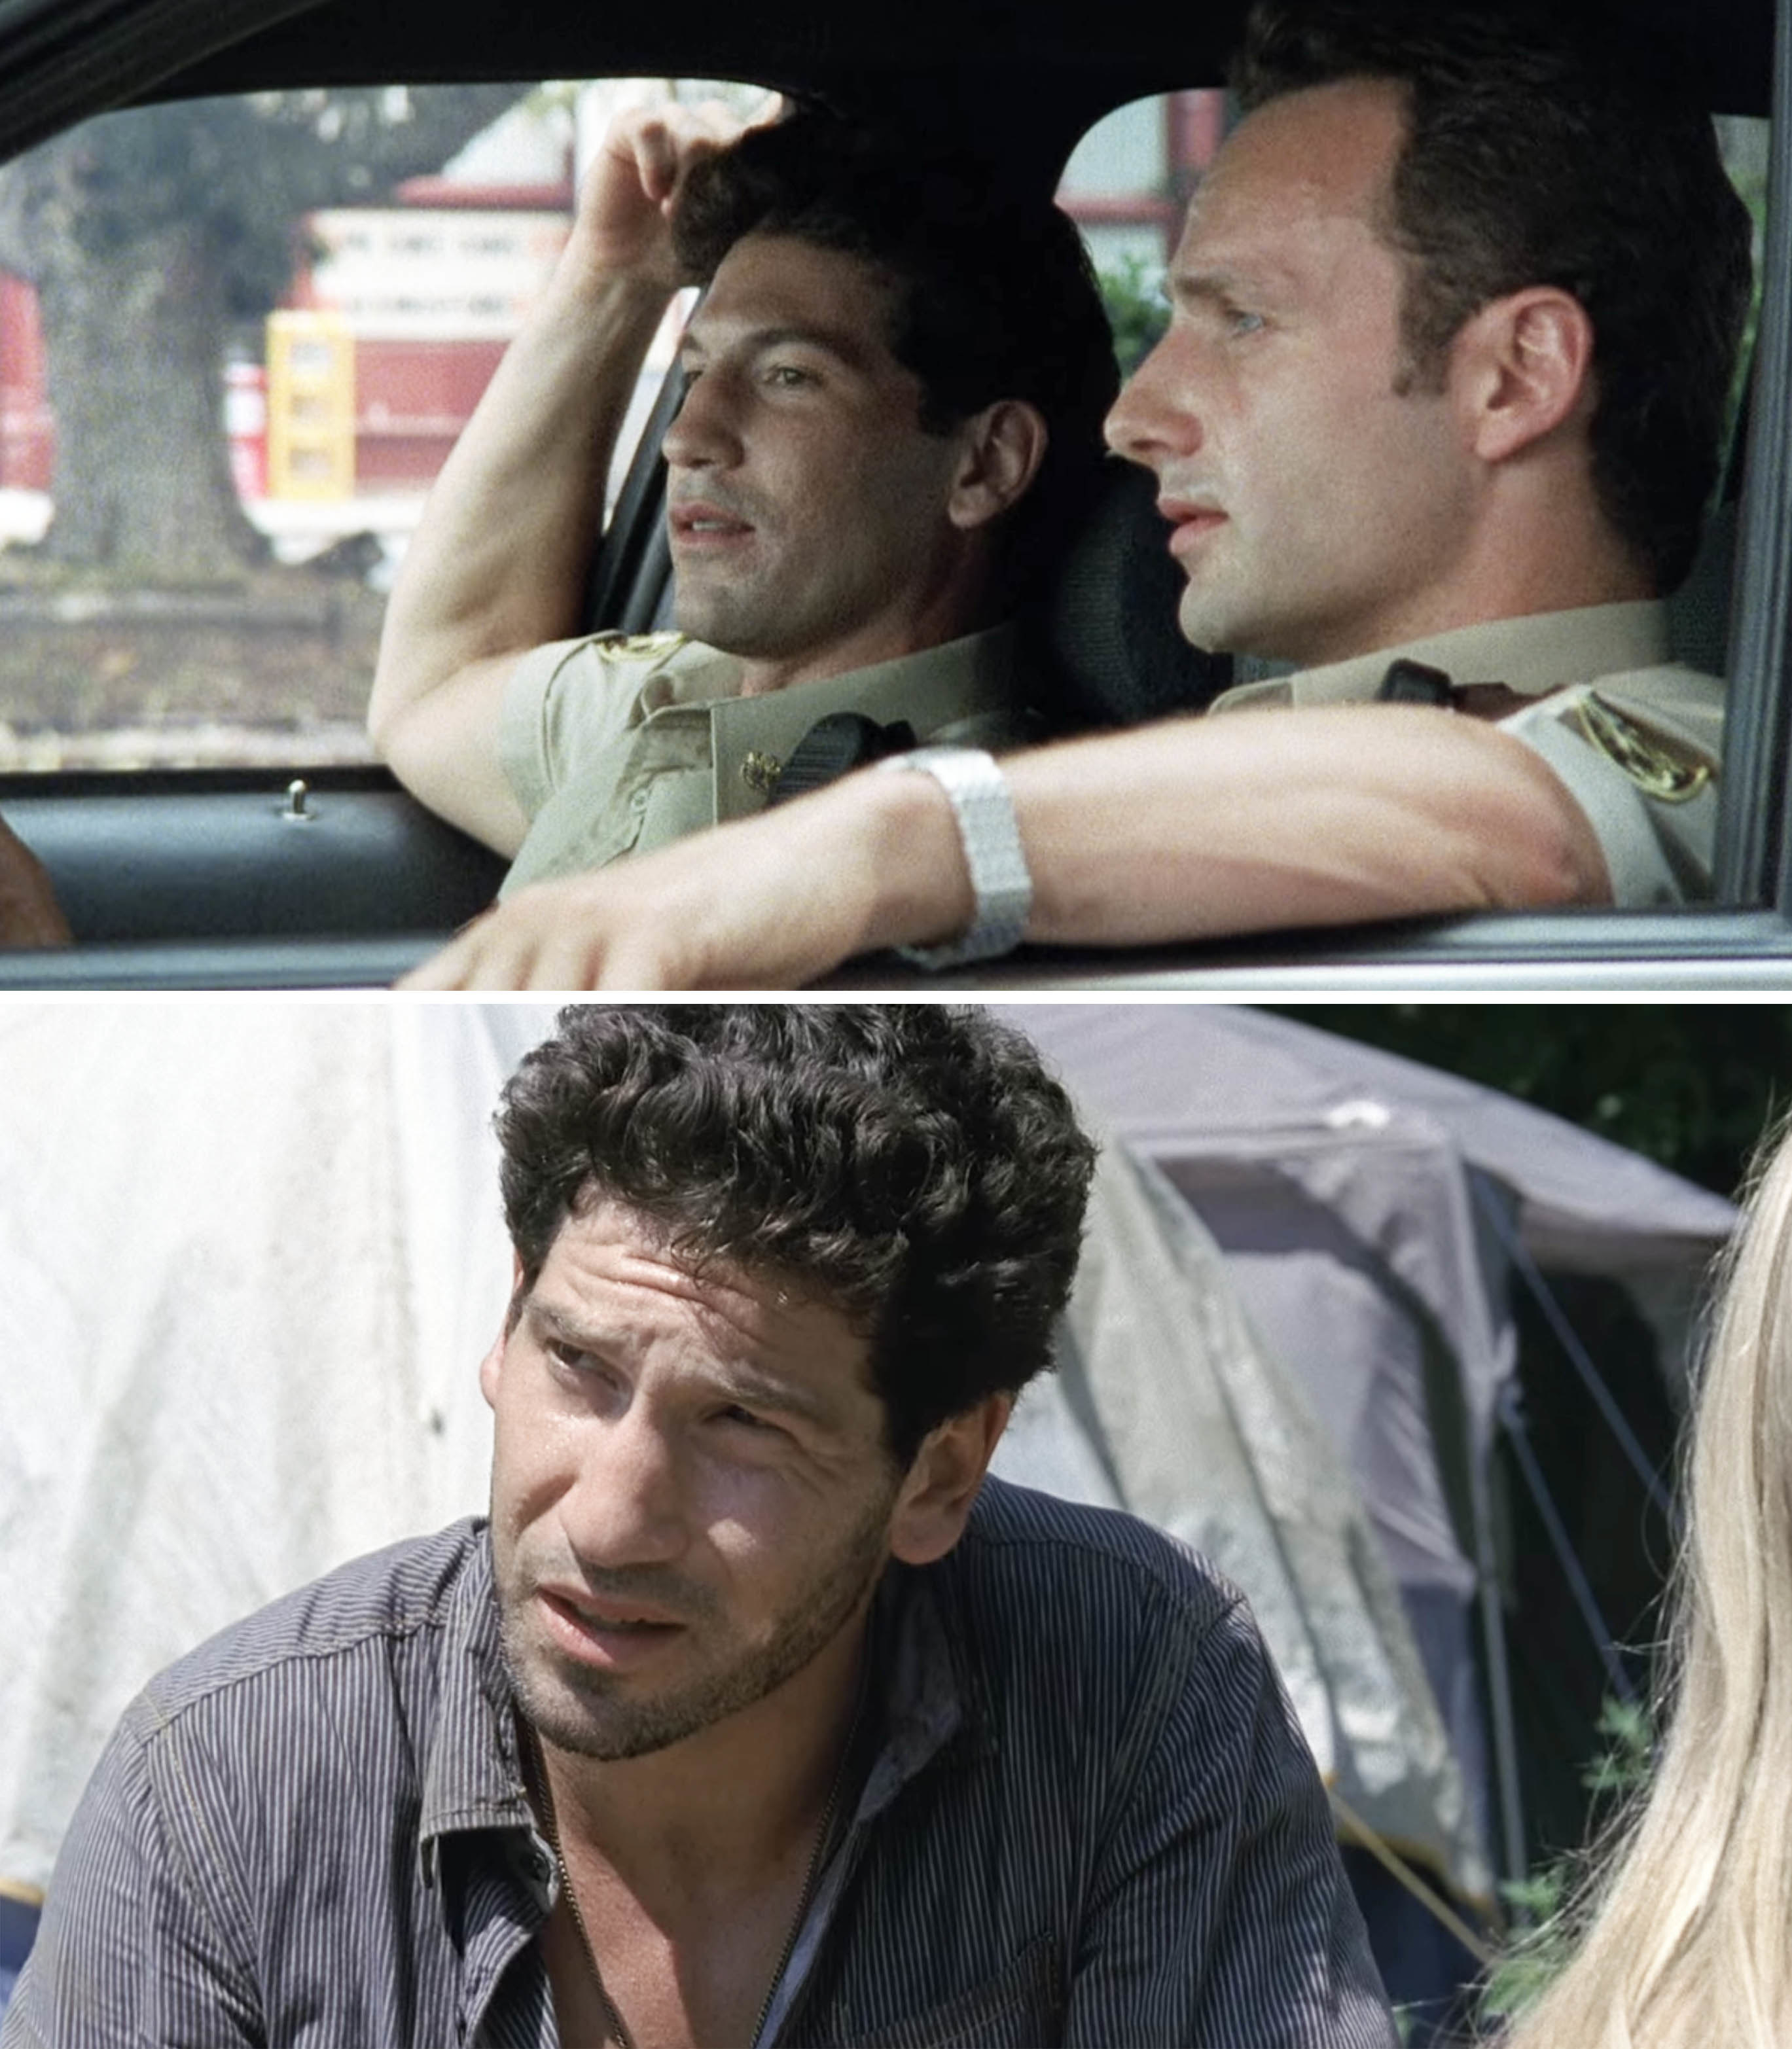 Shane Walsh sitting in a car; Shane looking at something outside